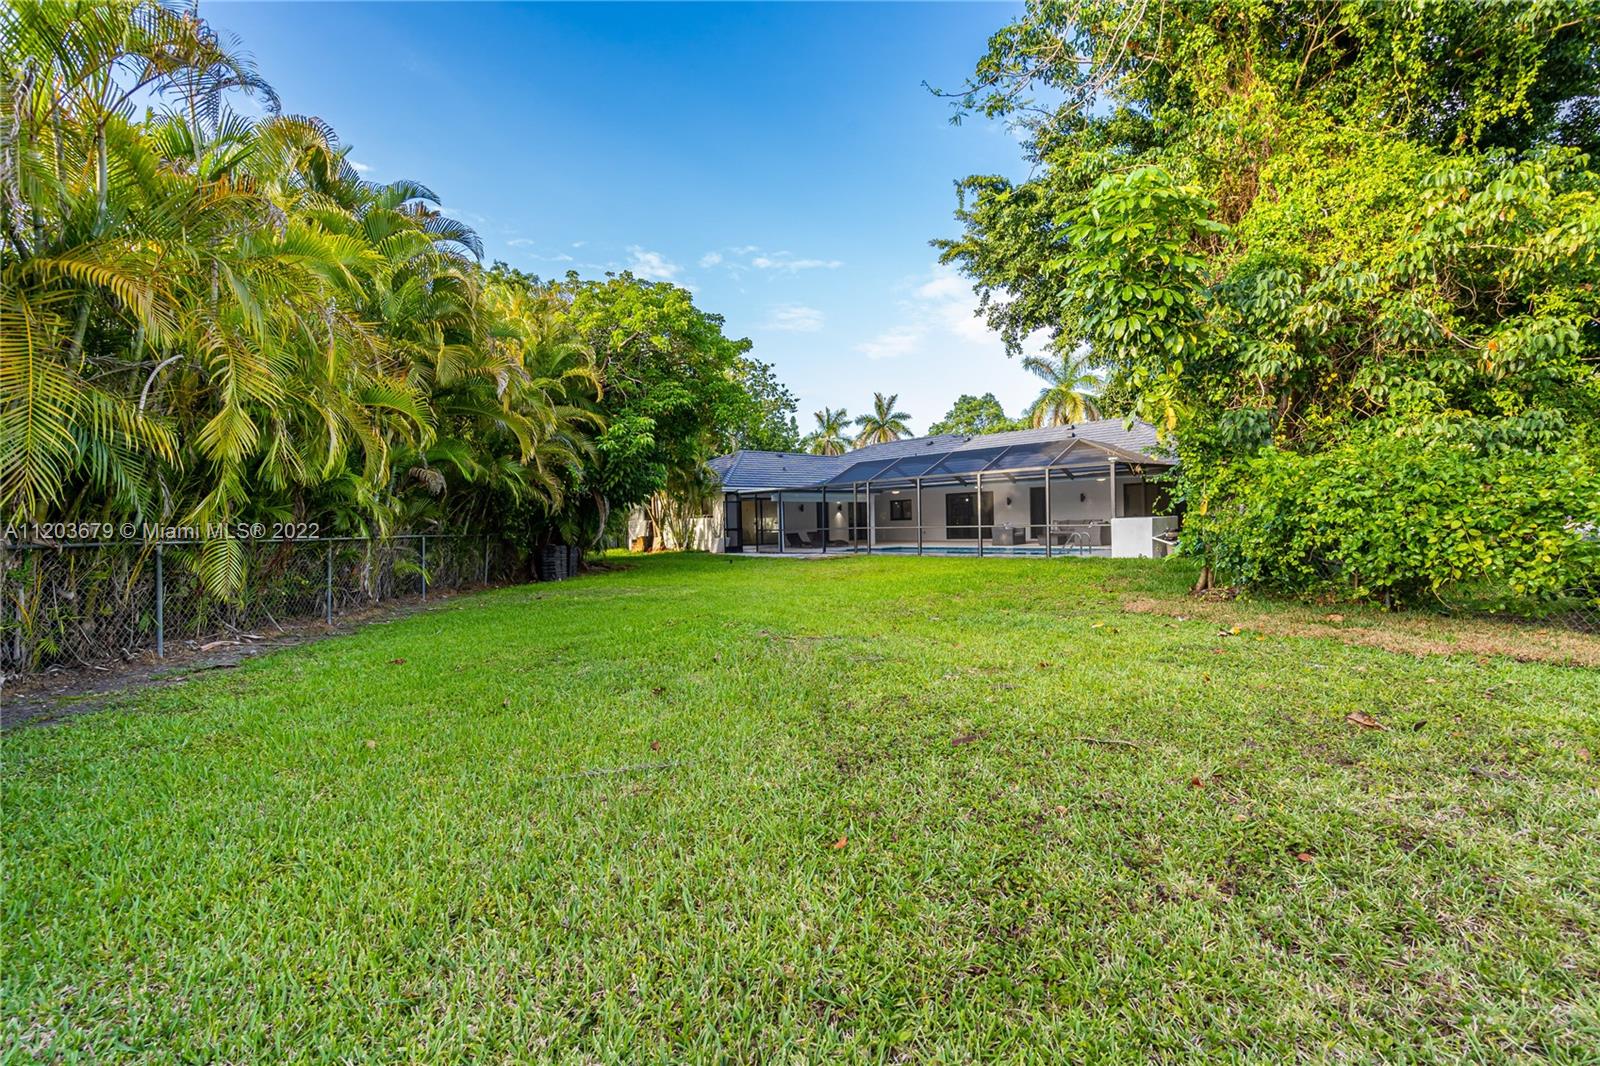 11600 SW 72nd Ave, Pinecrest, Florida 33156, 5 Bedrooms Bedrooms, ,3 BathroomsBathrooms,Residential,For Sale,11600 SW 72nd Ave,A11203679